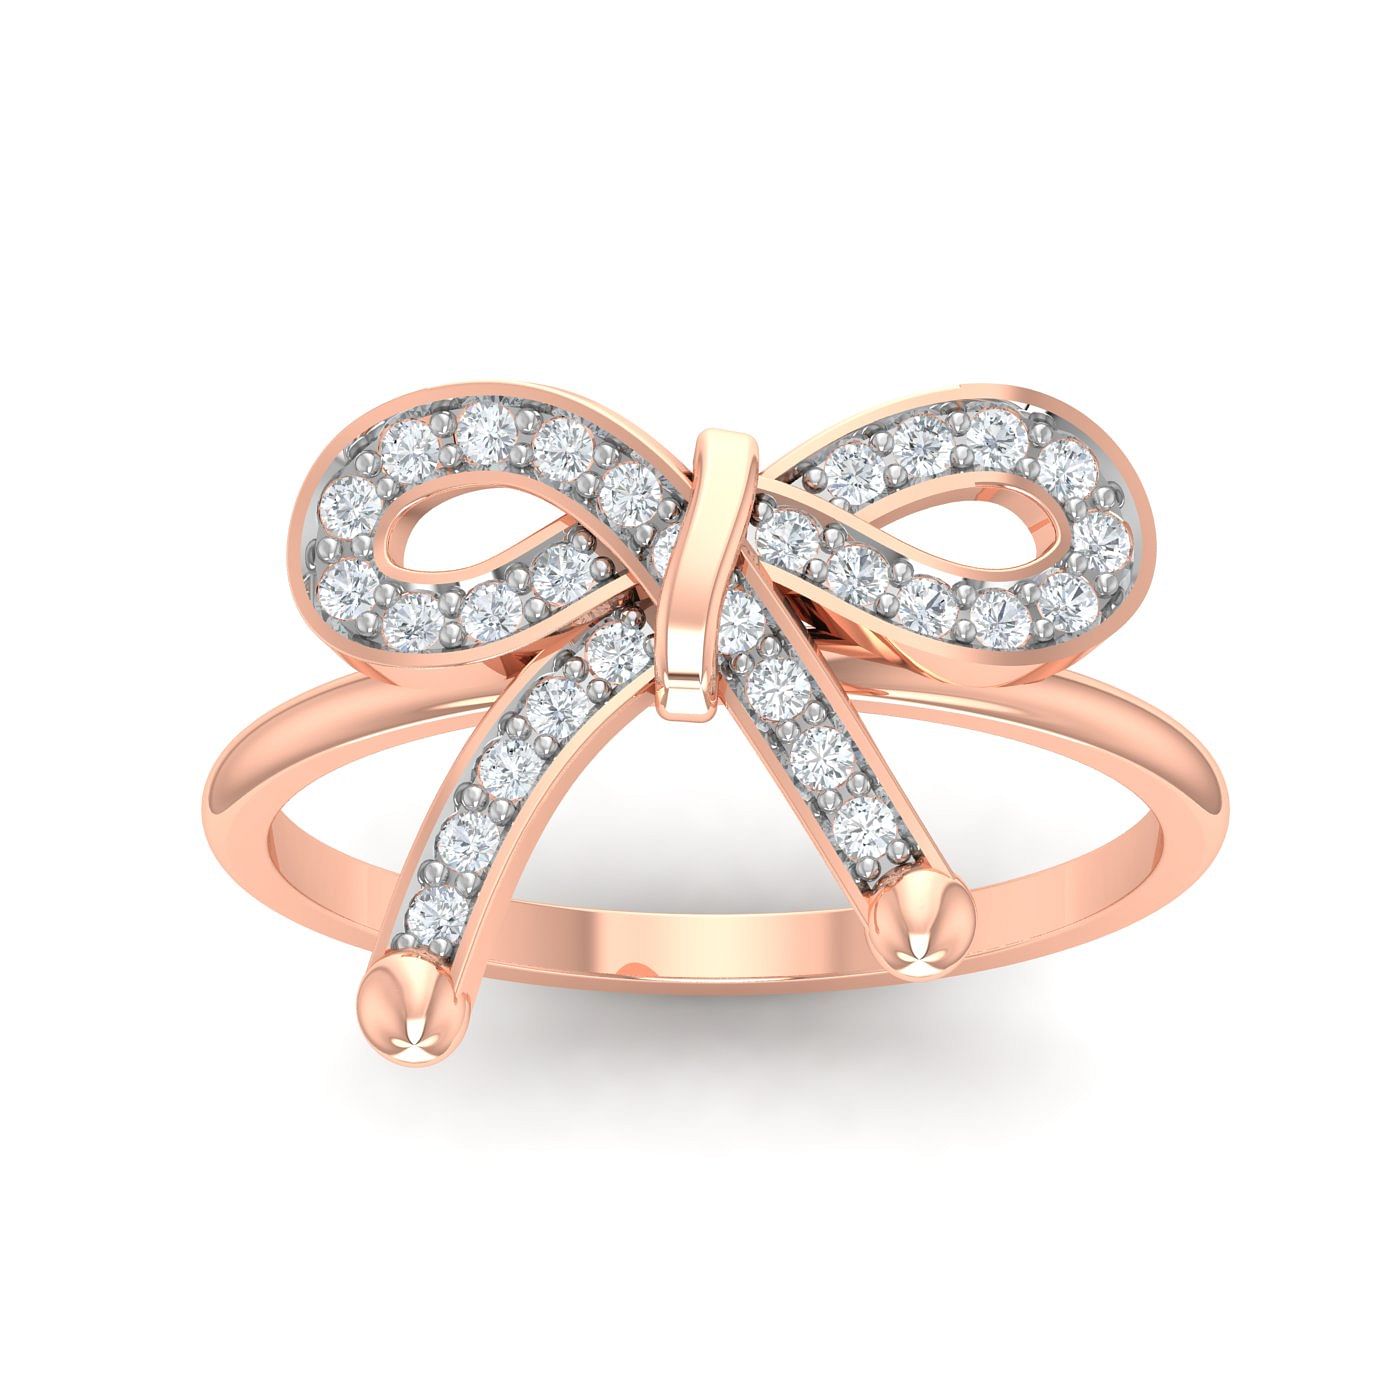 Bow Knot Diamond Ring With Rose Gold For Women